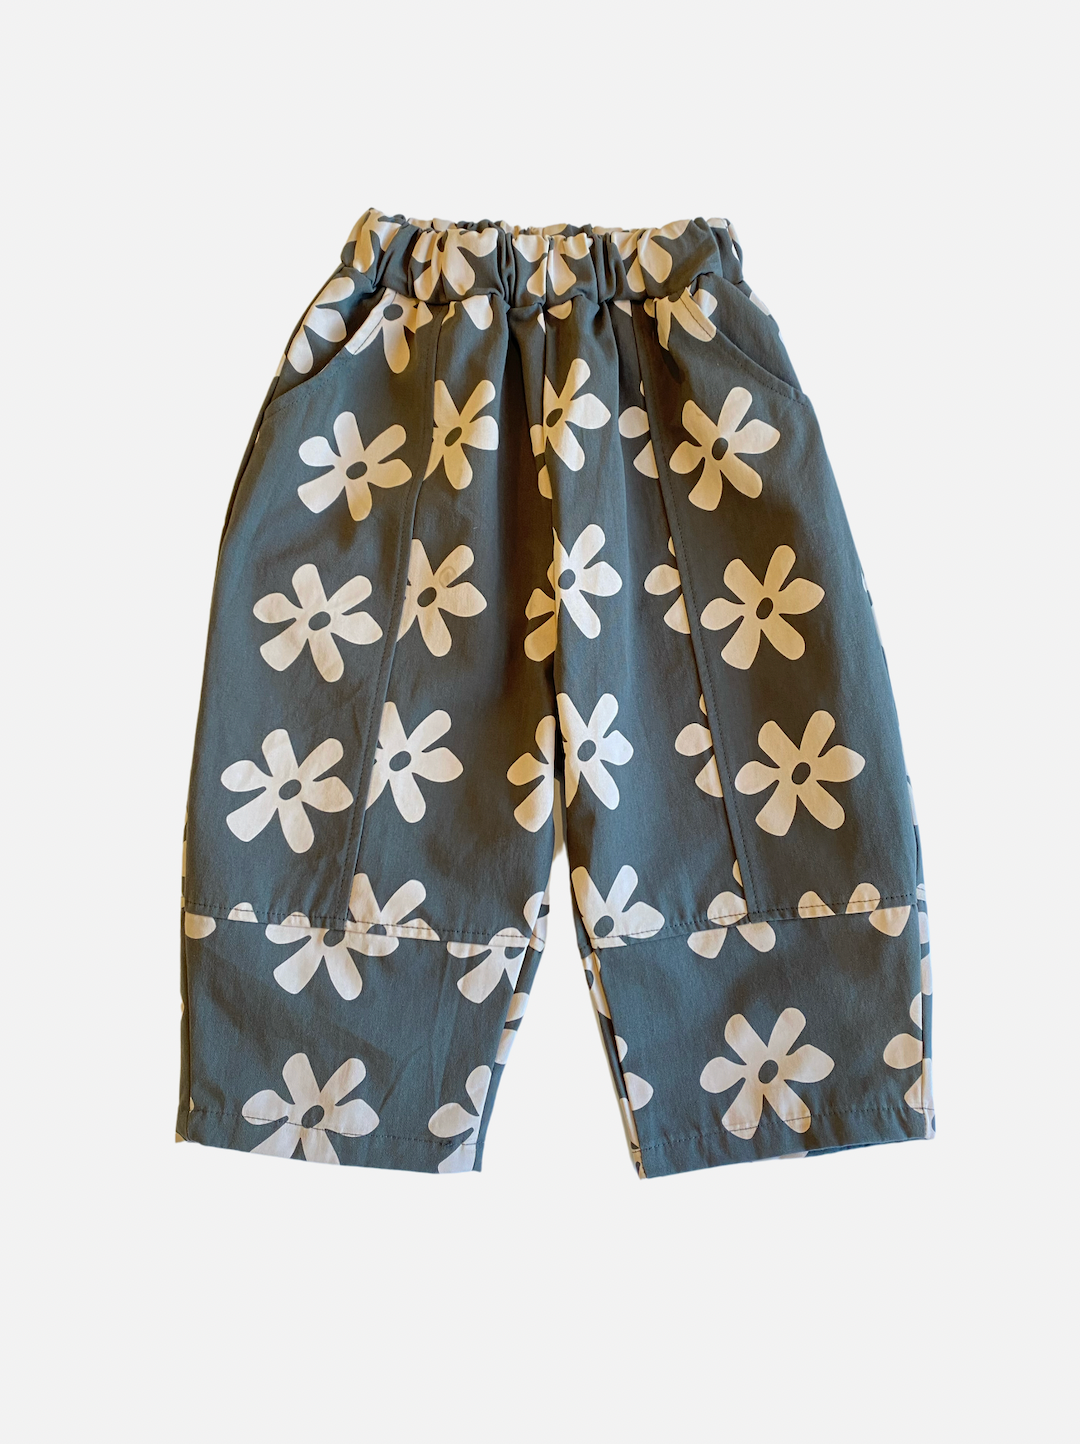 A pair of kids' pants in gray with cream flowers